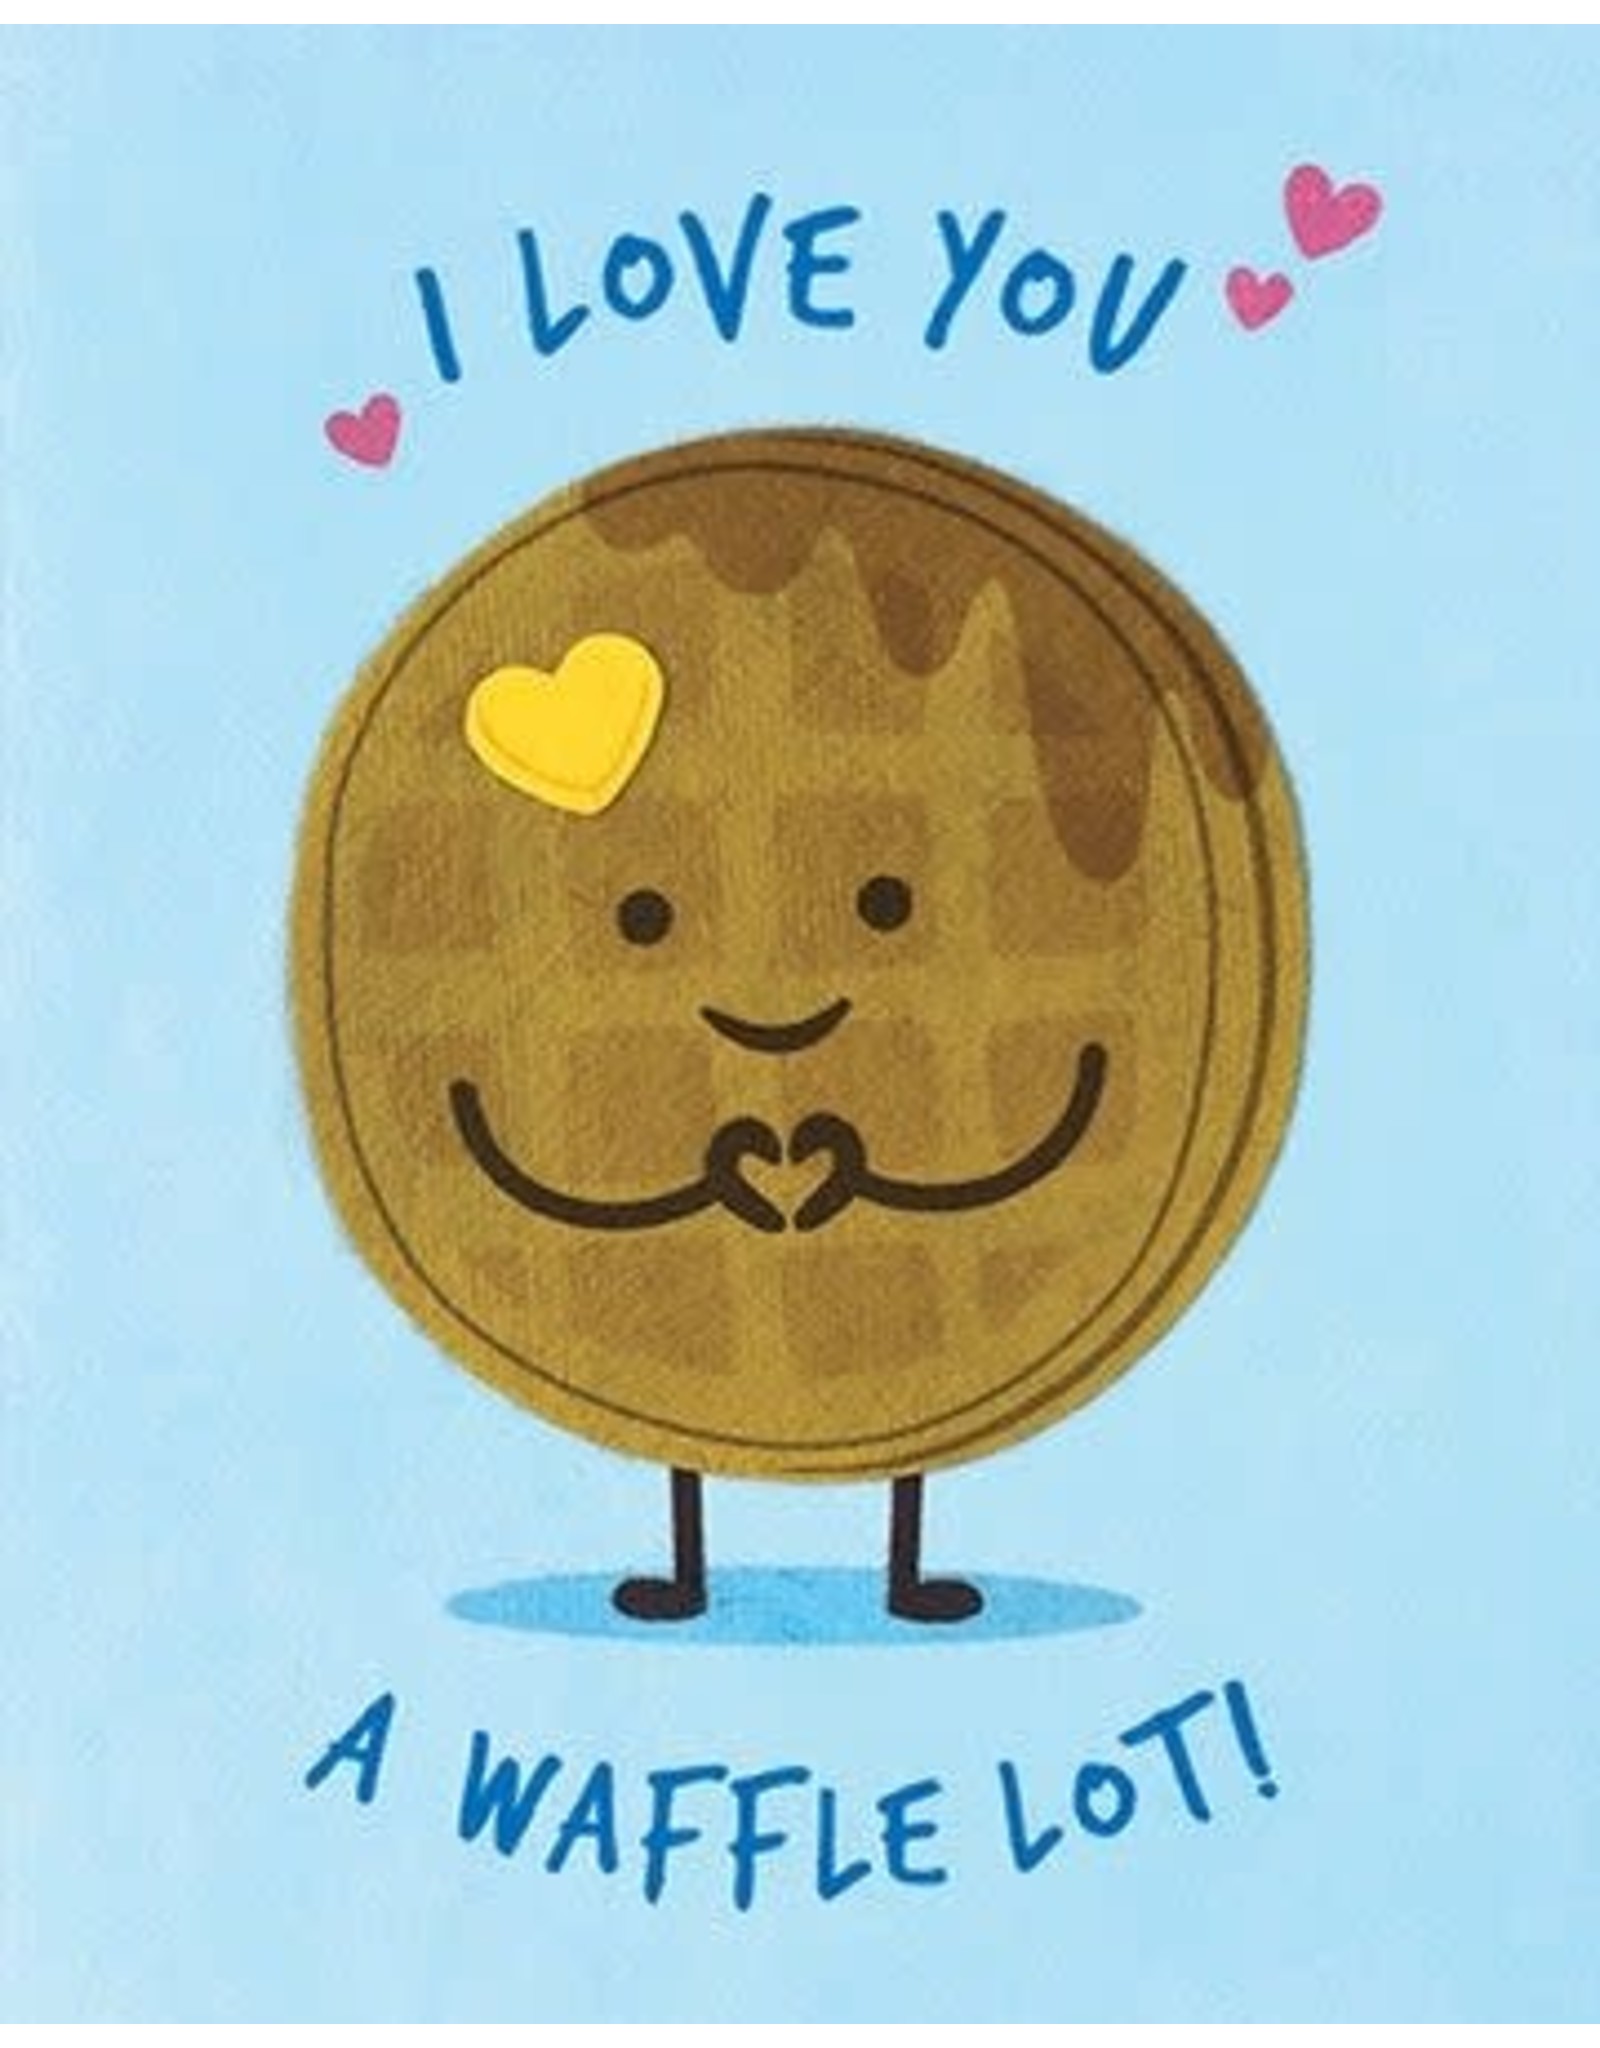 Philippines Waffle Love Greeting Card, Philippines